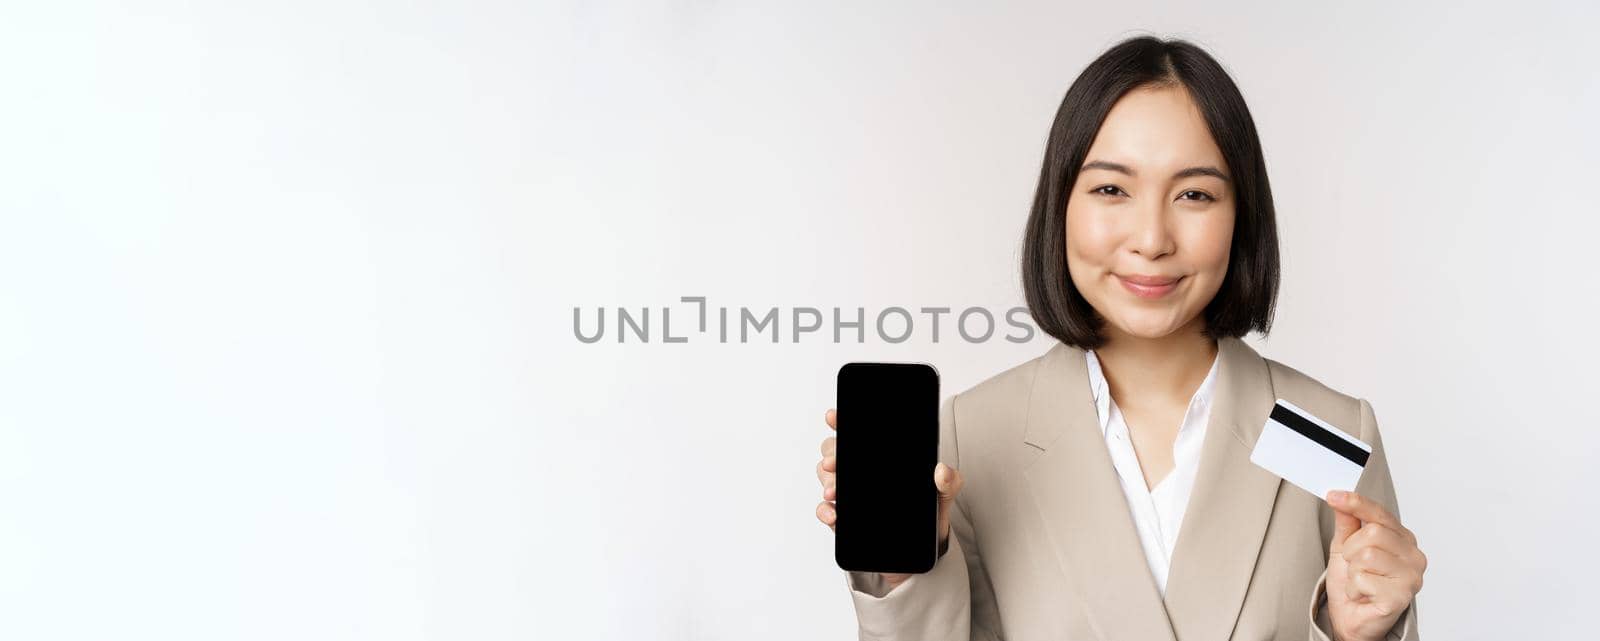 Smiling corporate woman in suit, showing mobile phone screen and app on mobile phone, smartphone screen, standing over white background.